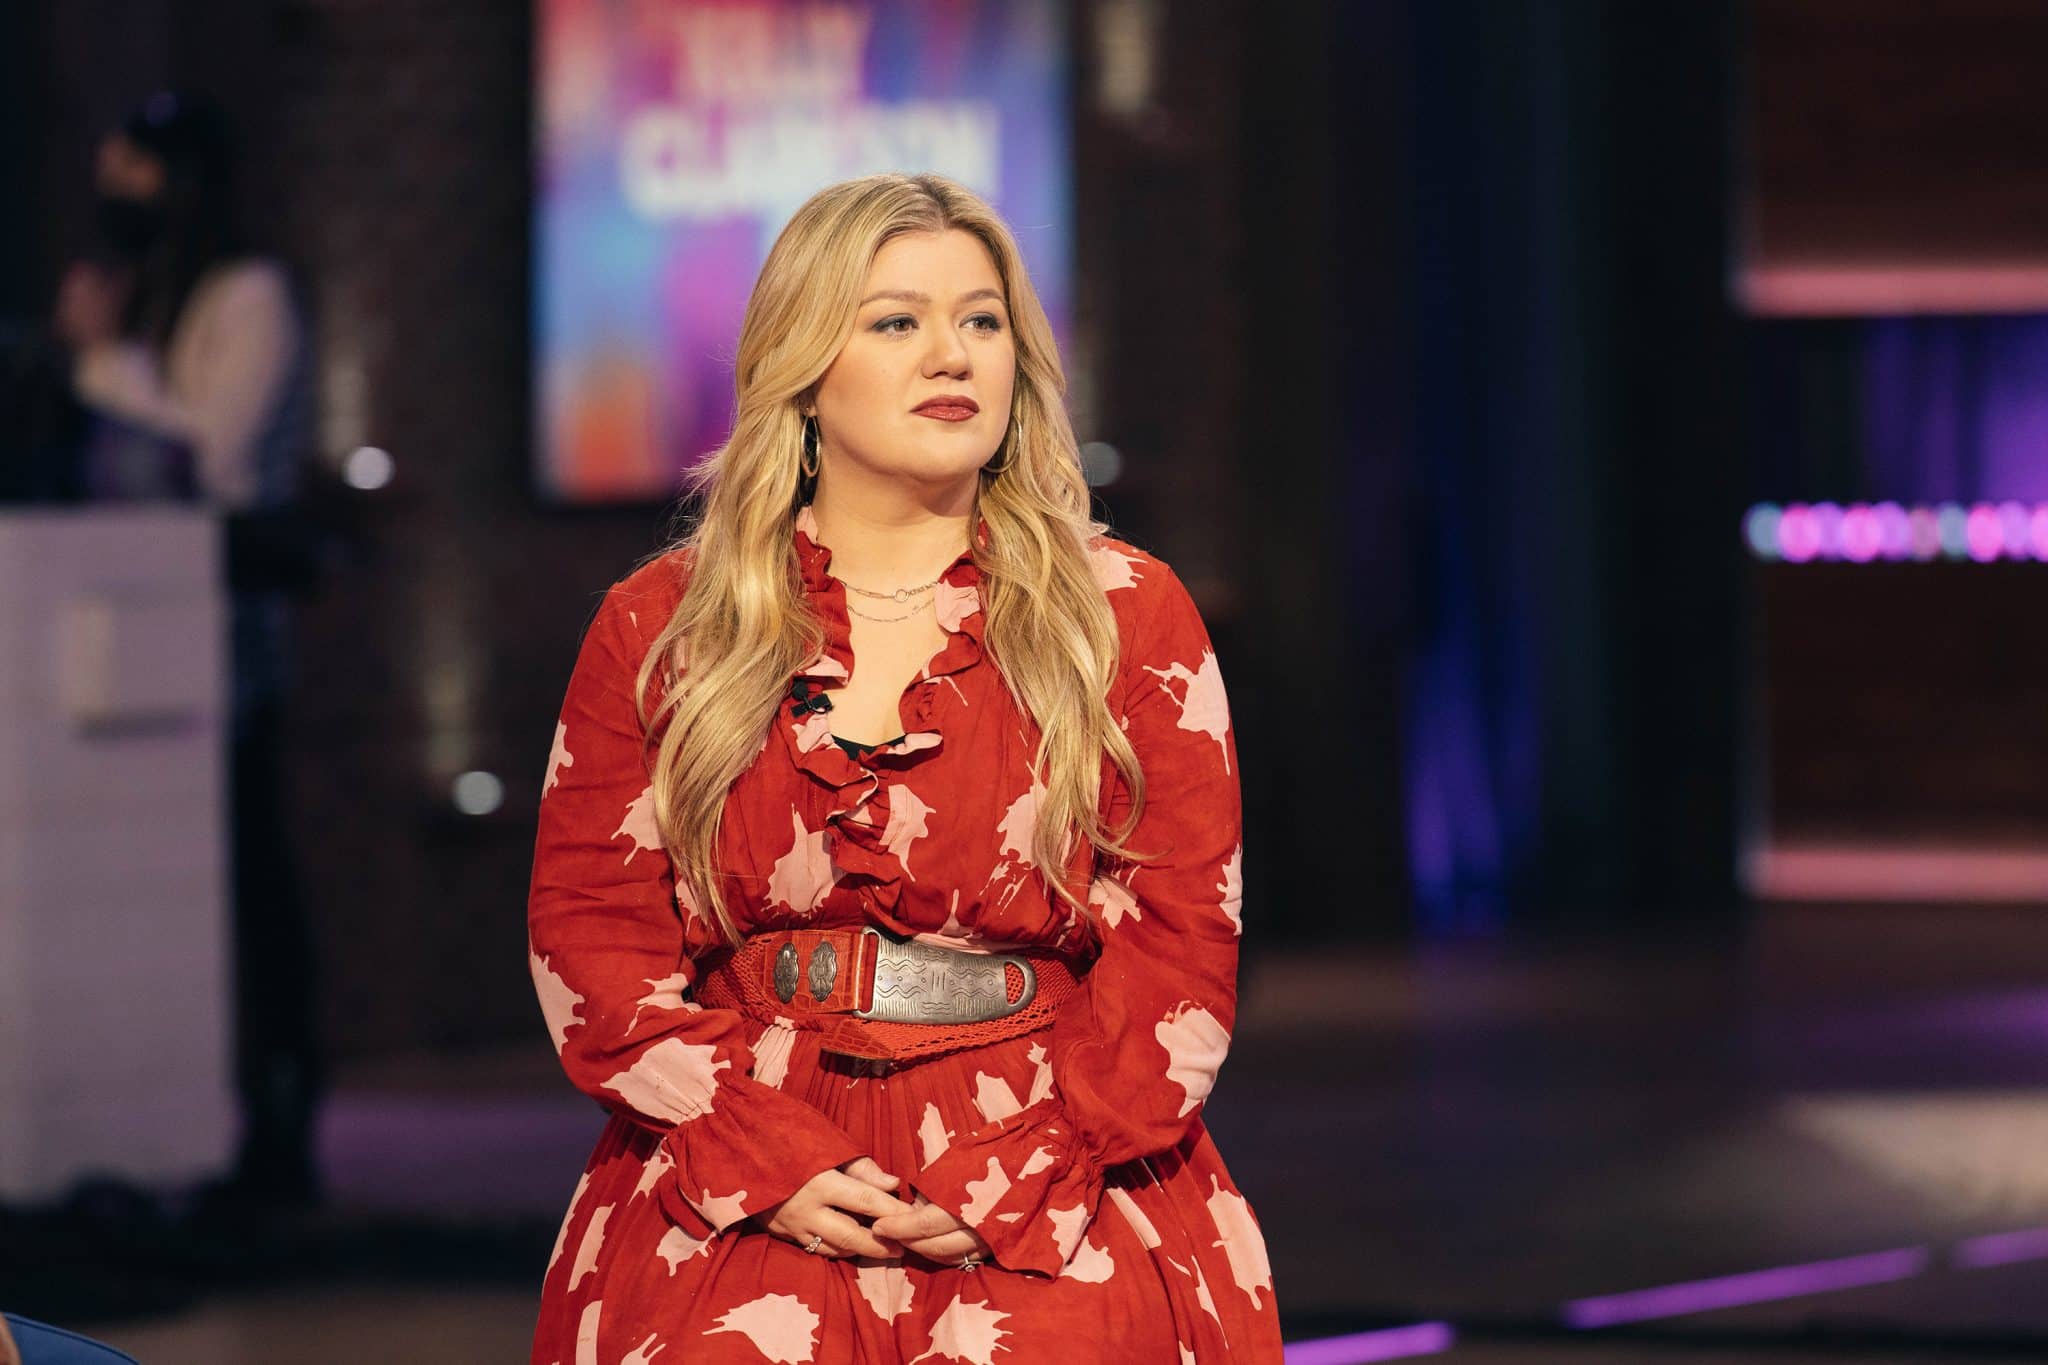 Kelly Clarkson addresses whether or not she'll replace Katy Perry on American Idol after moving her talk show from LA to NYC